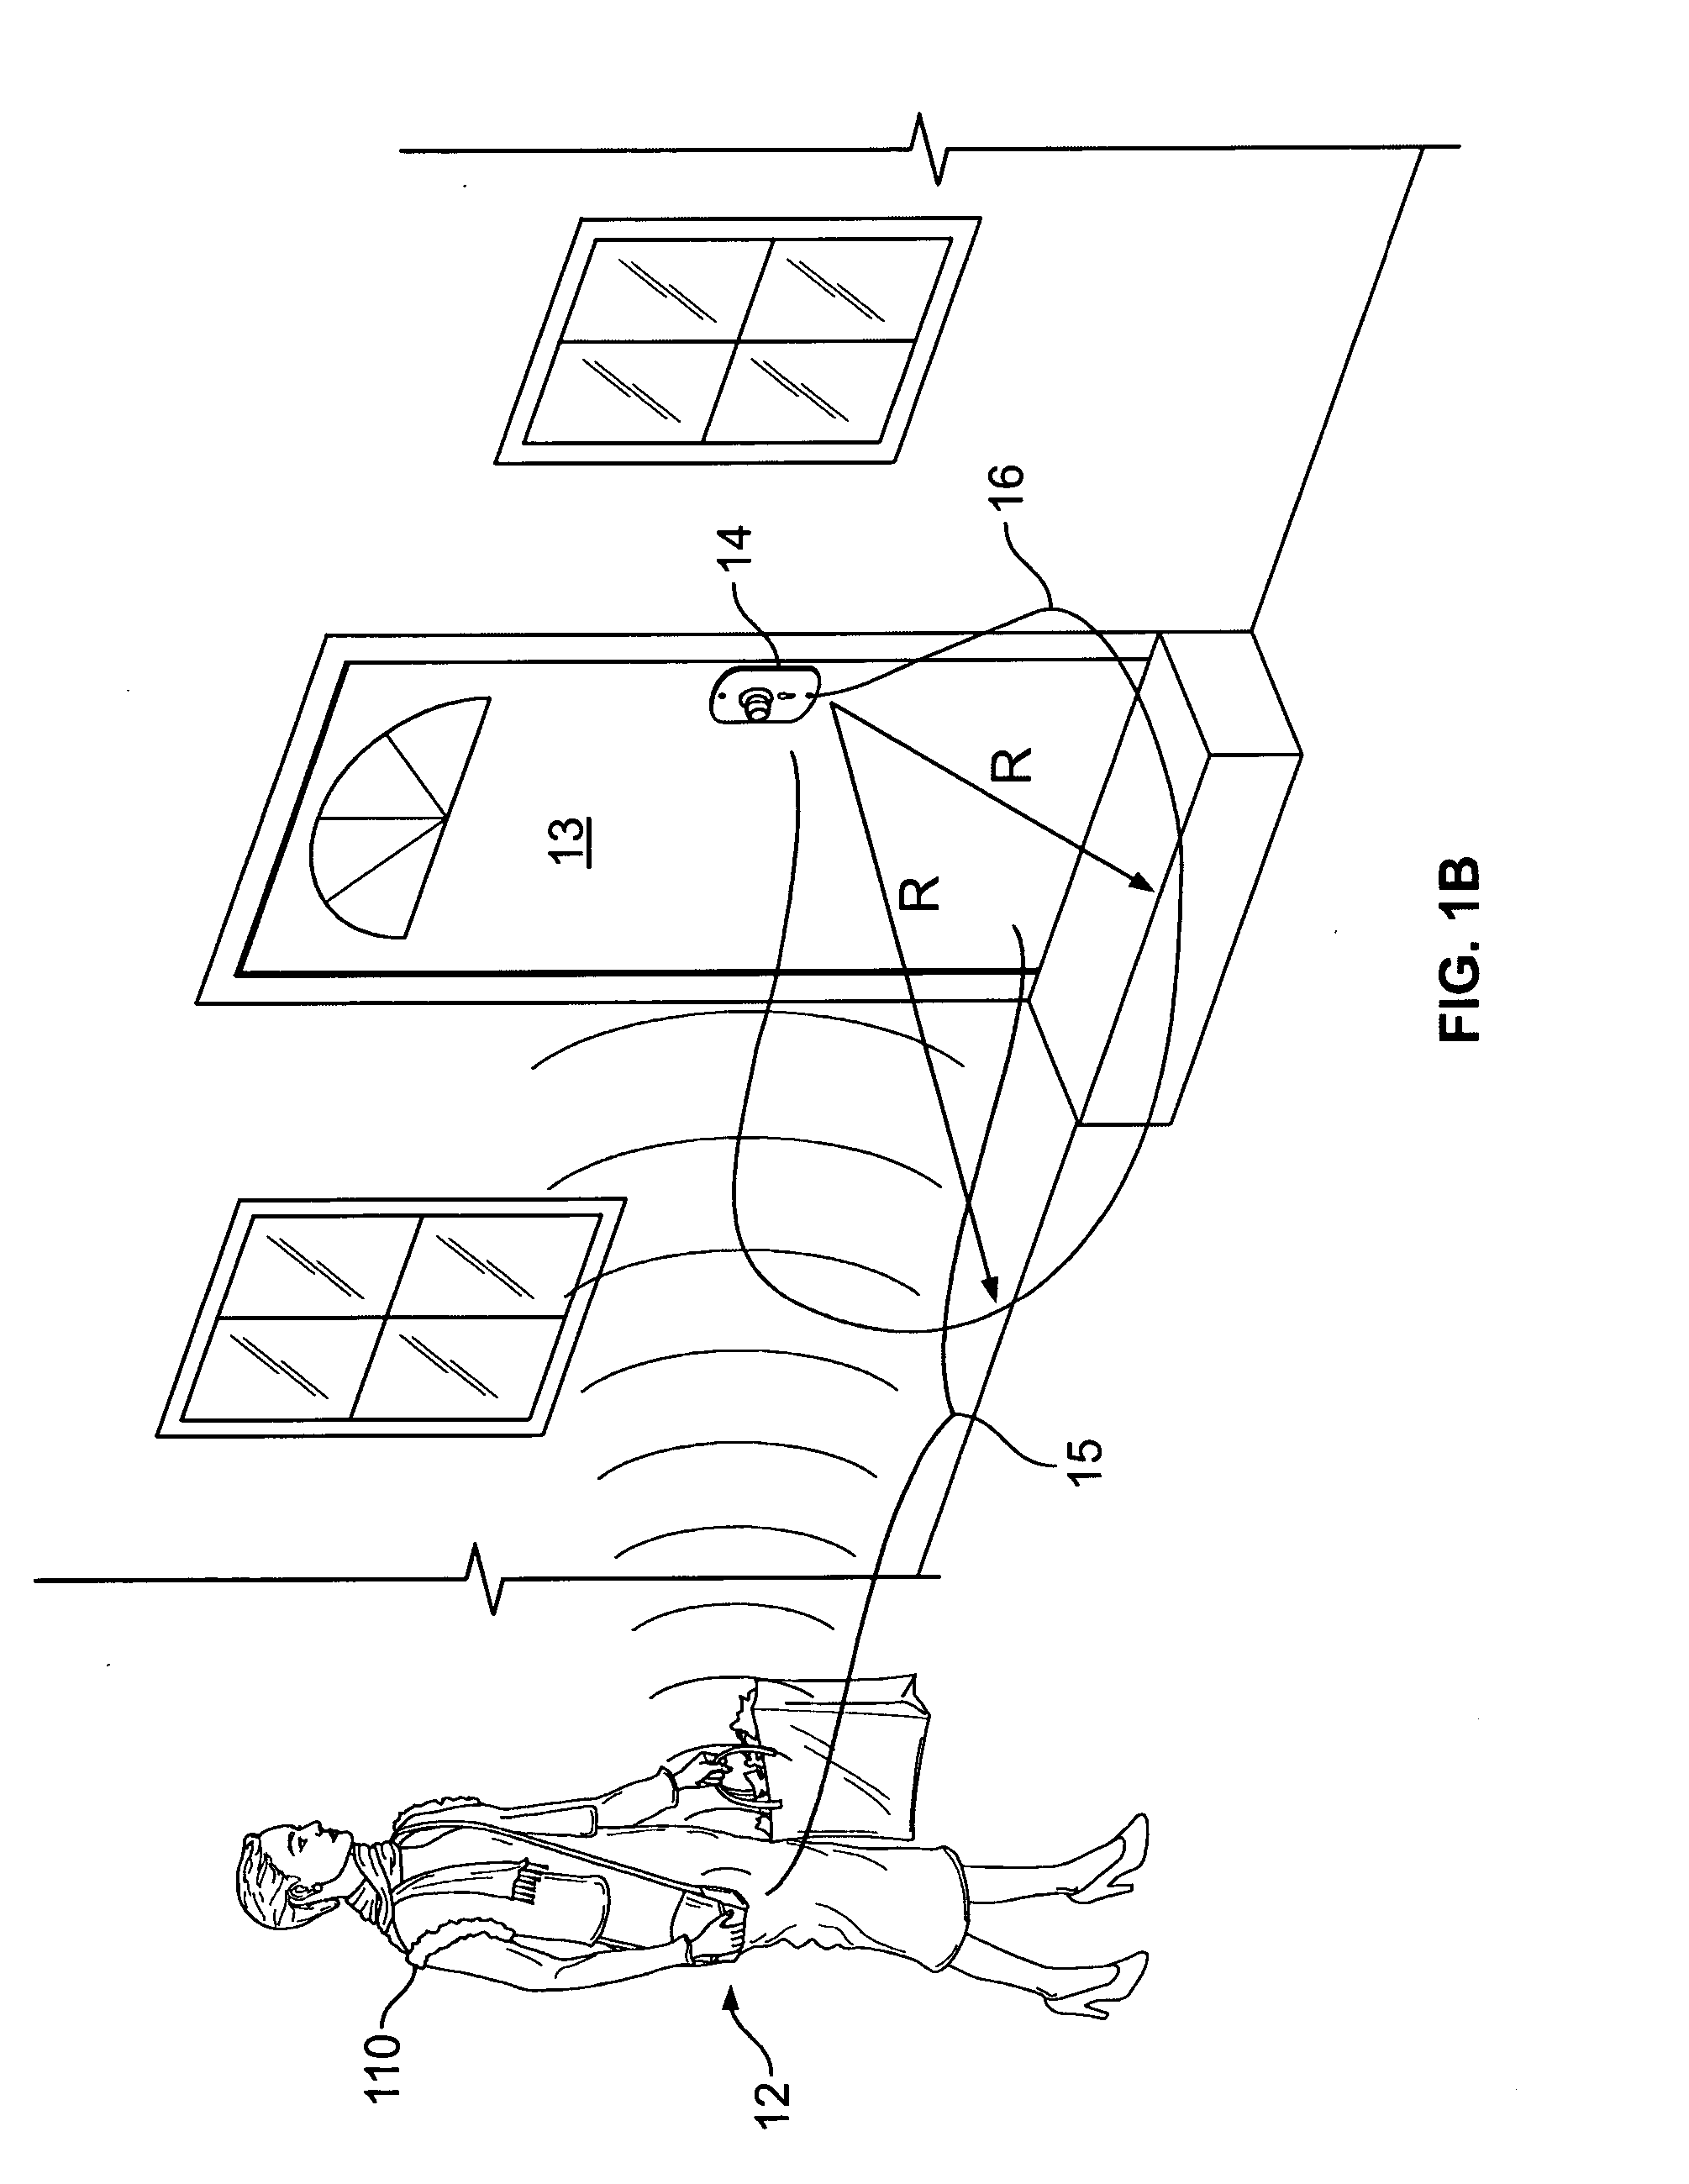 Universal hands free key and lock system and method